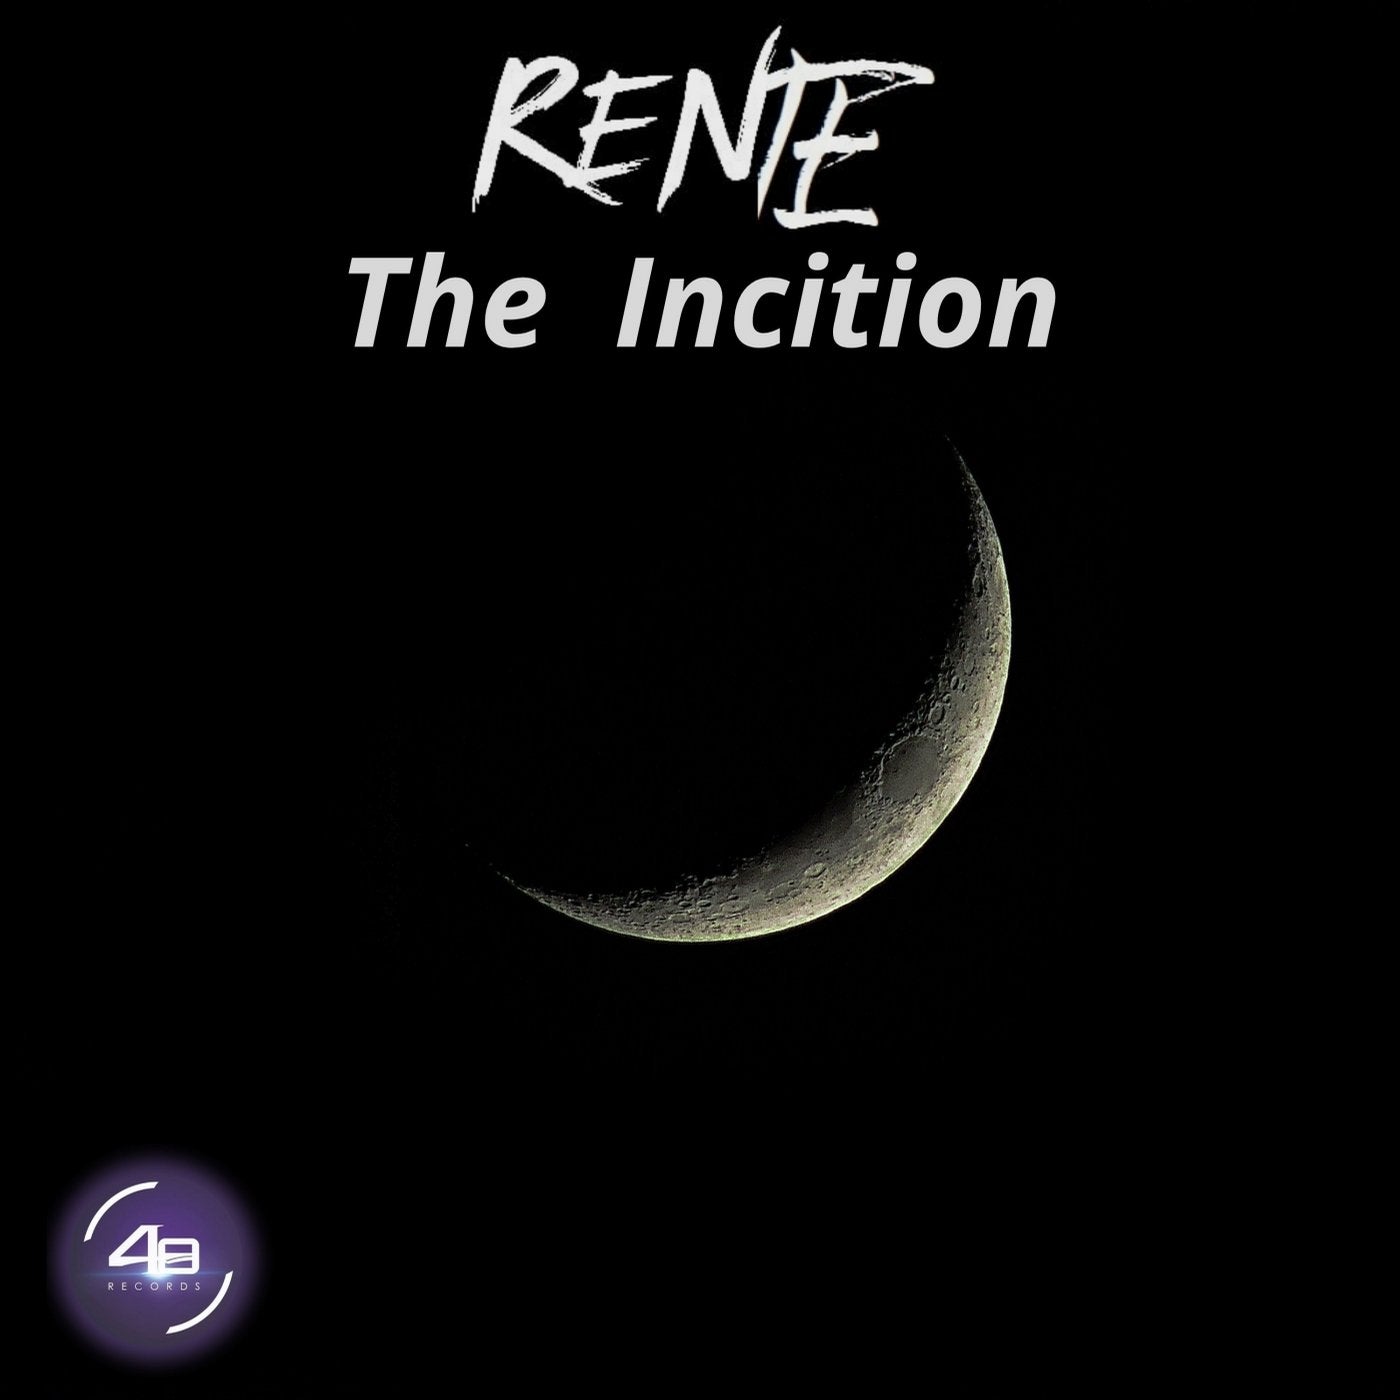 The Incition